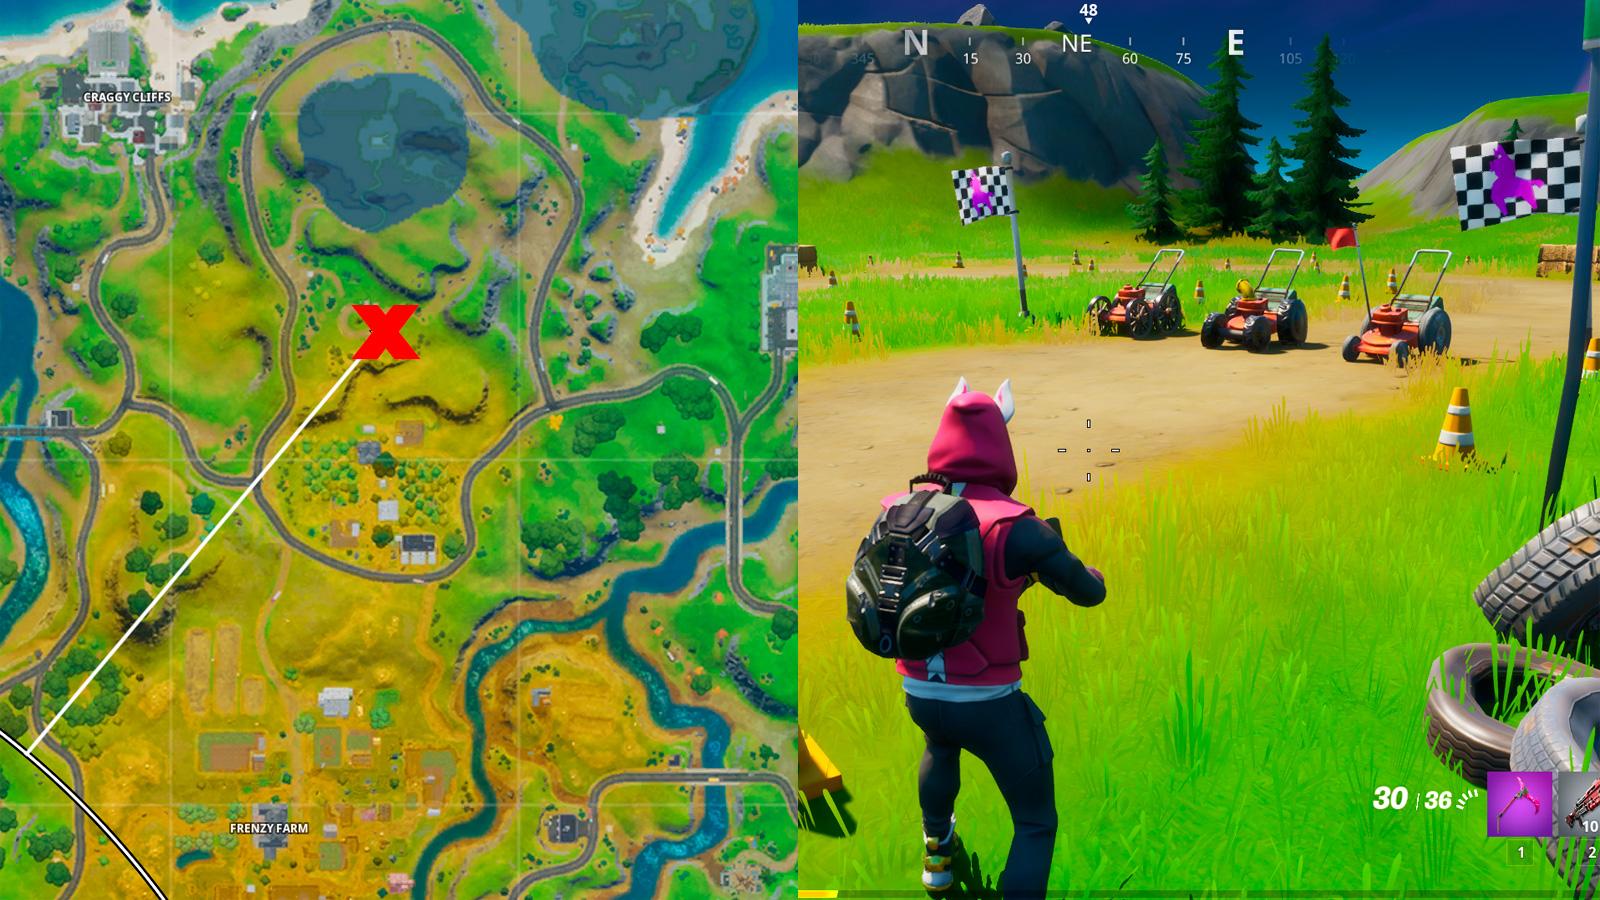 Map and location of Mowdown spot in Fortnite.